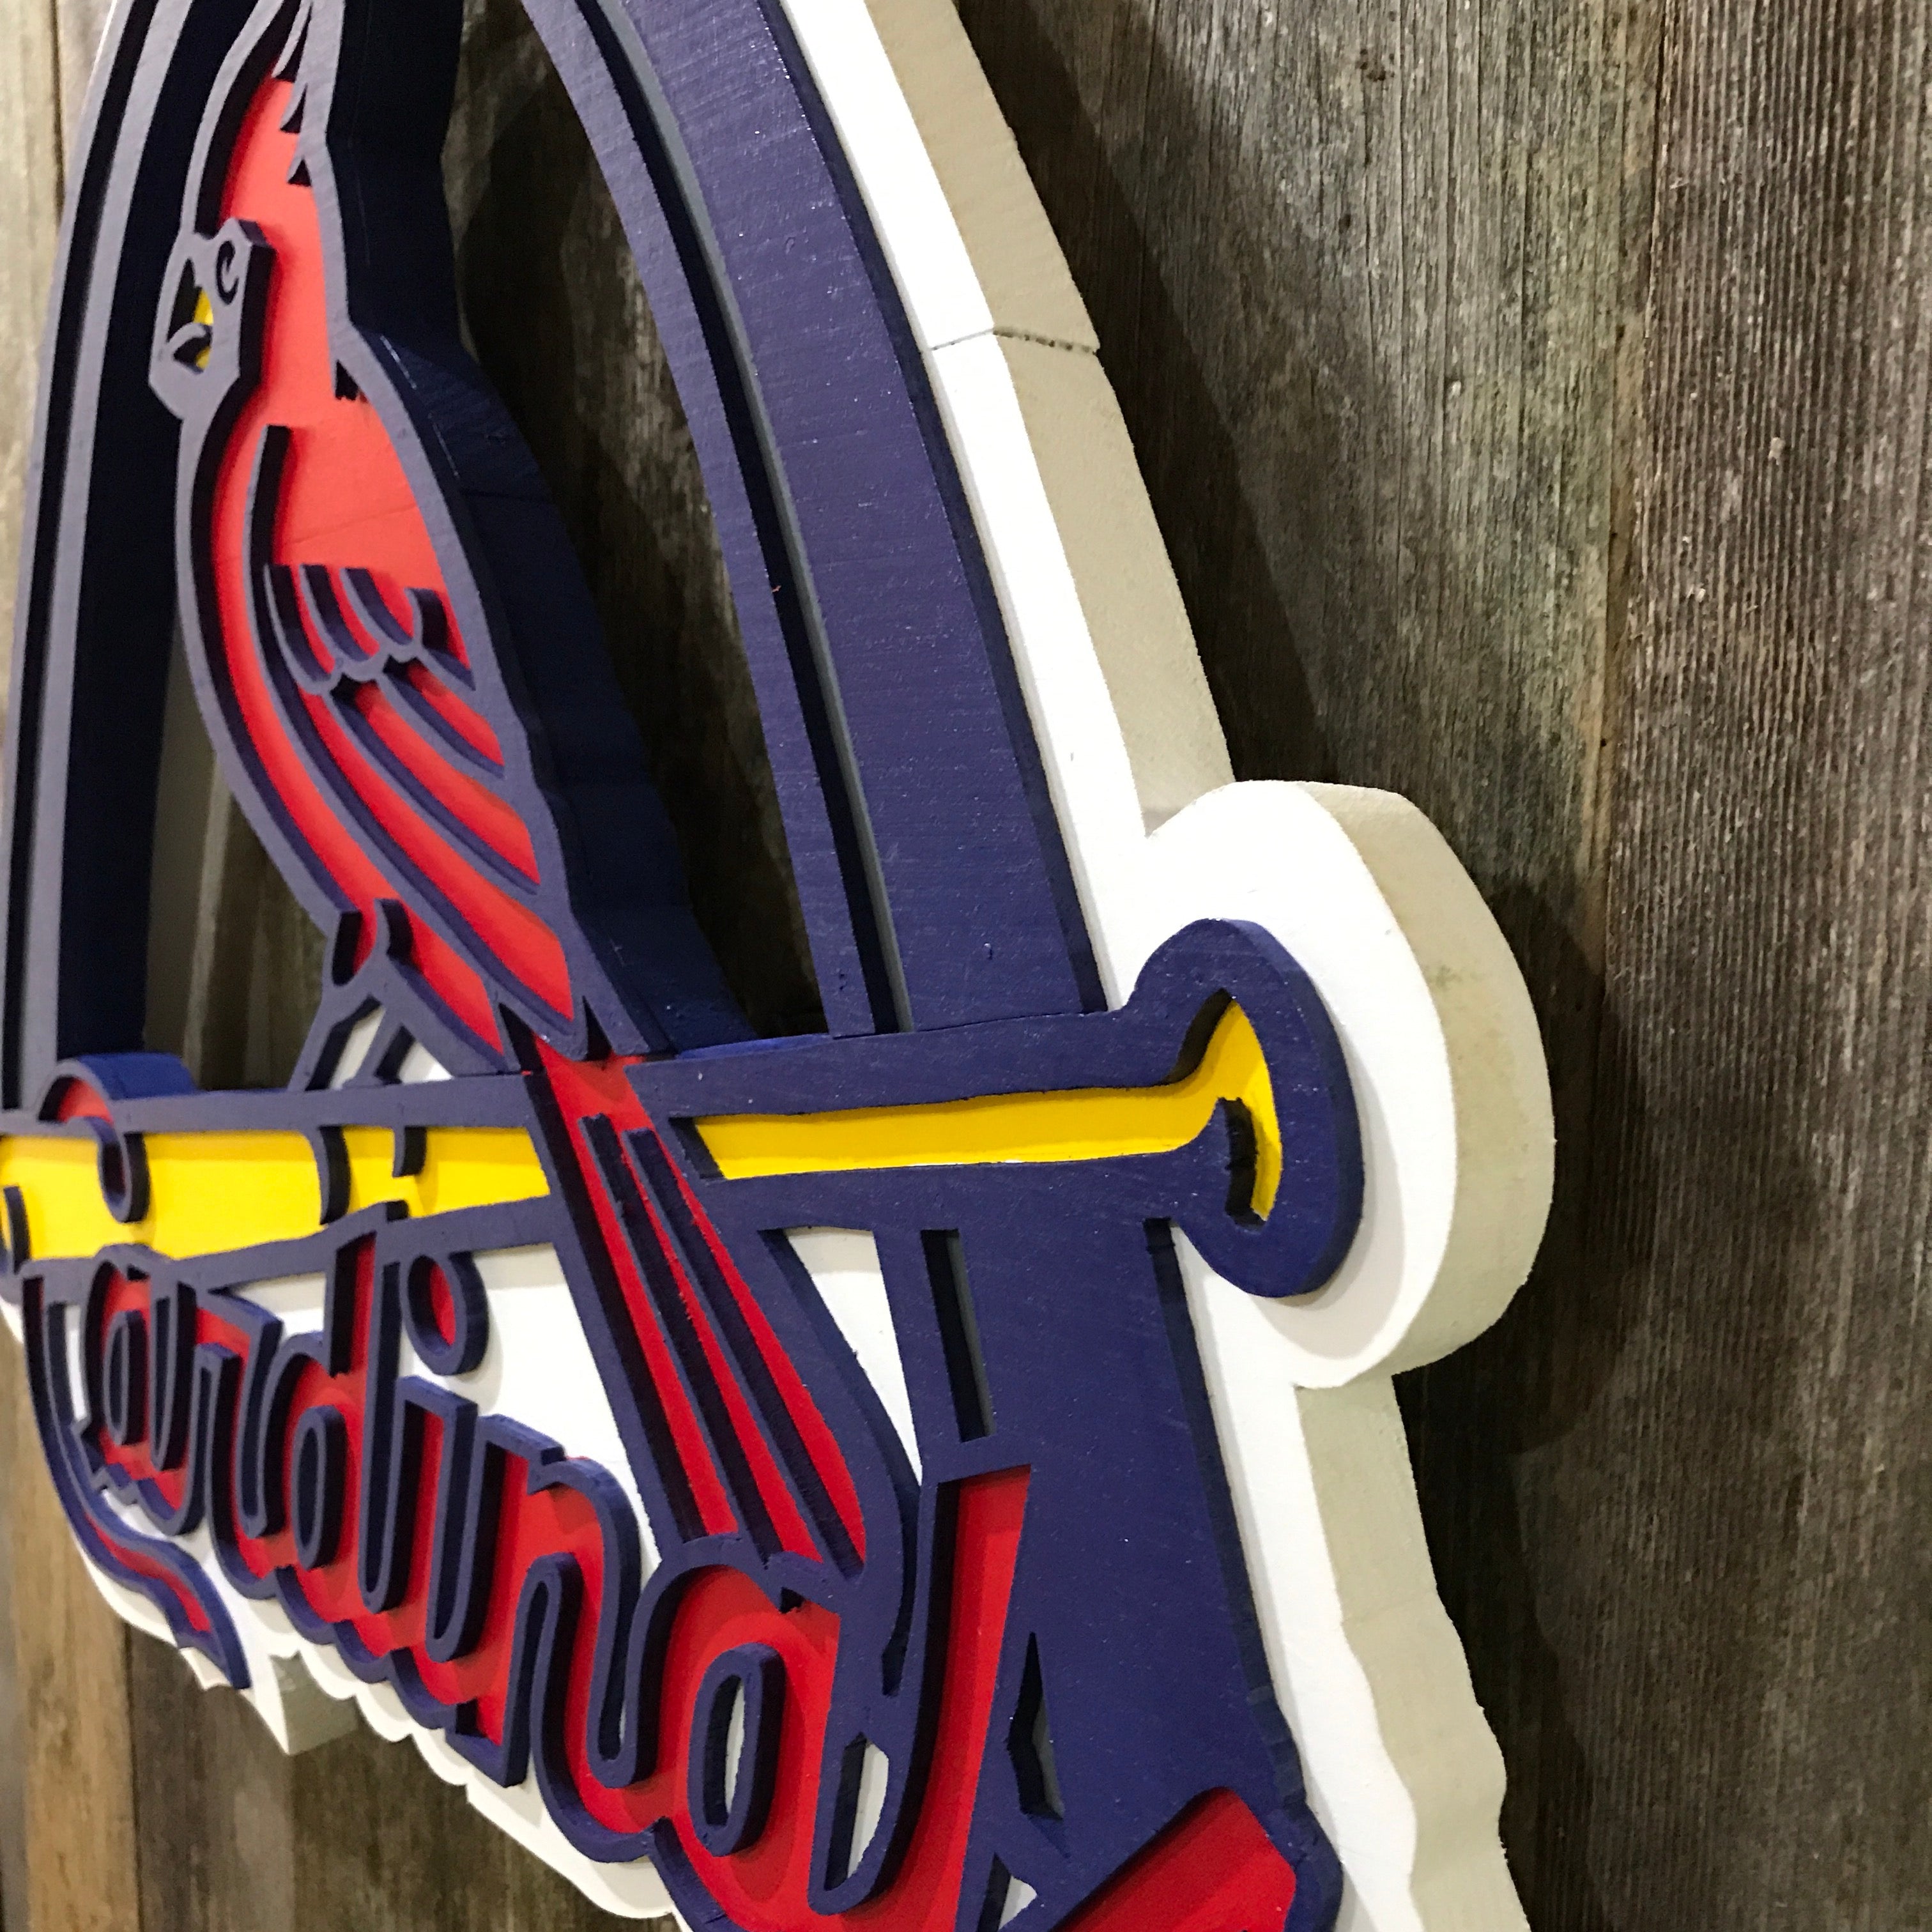 St. Louis Cardinals with Arch – Country Heritage Creations